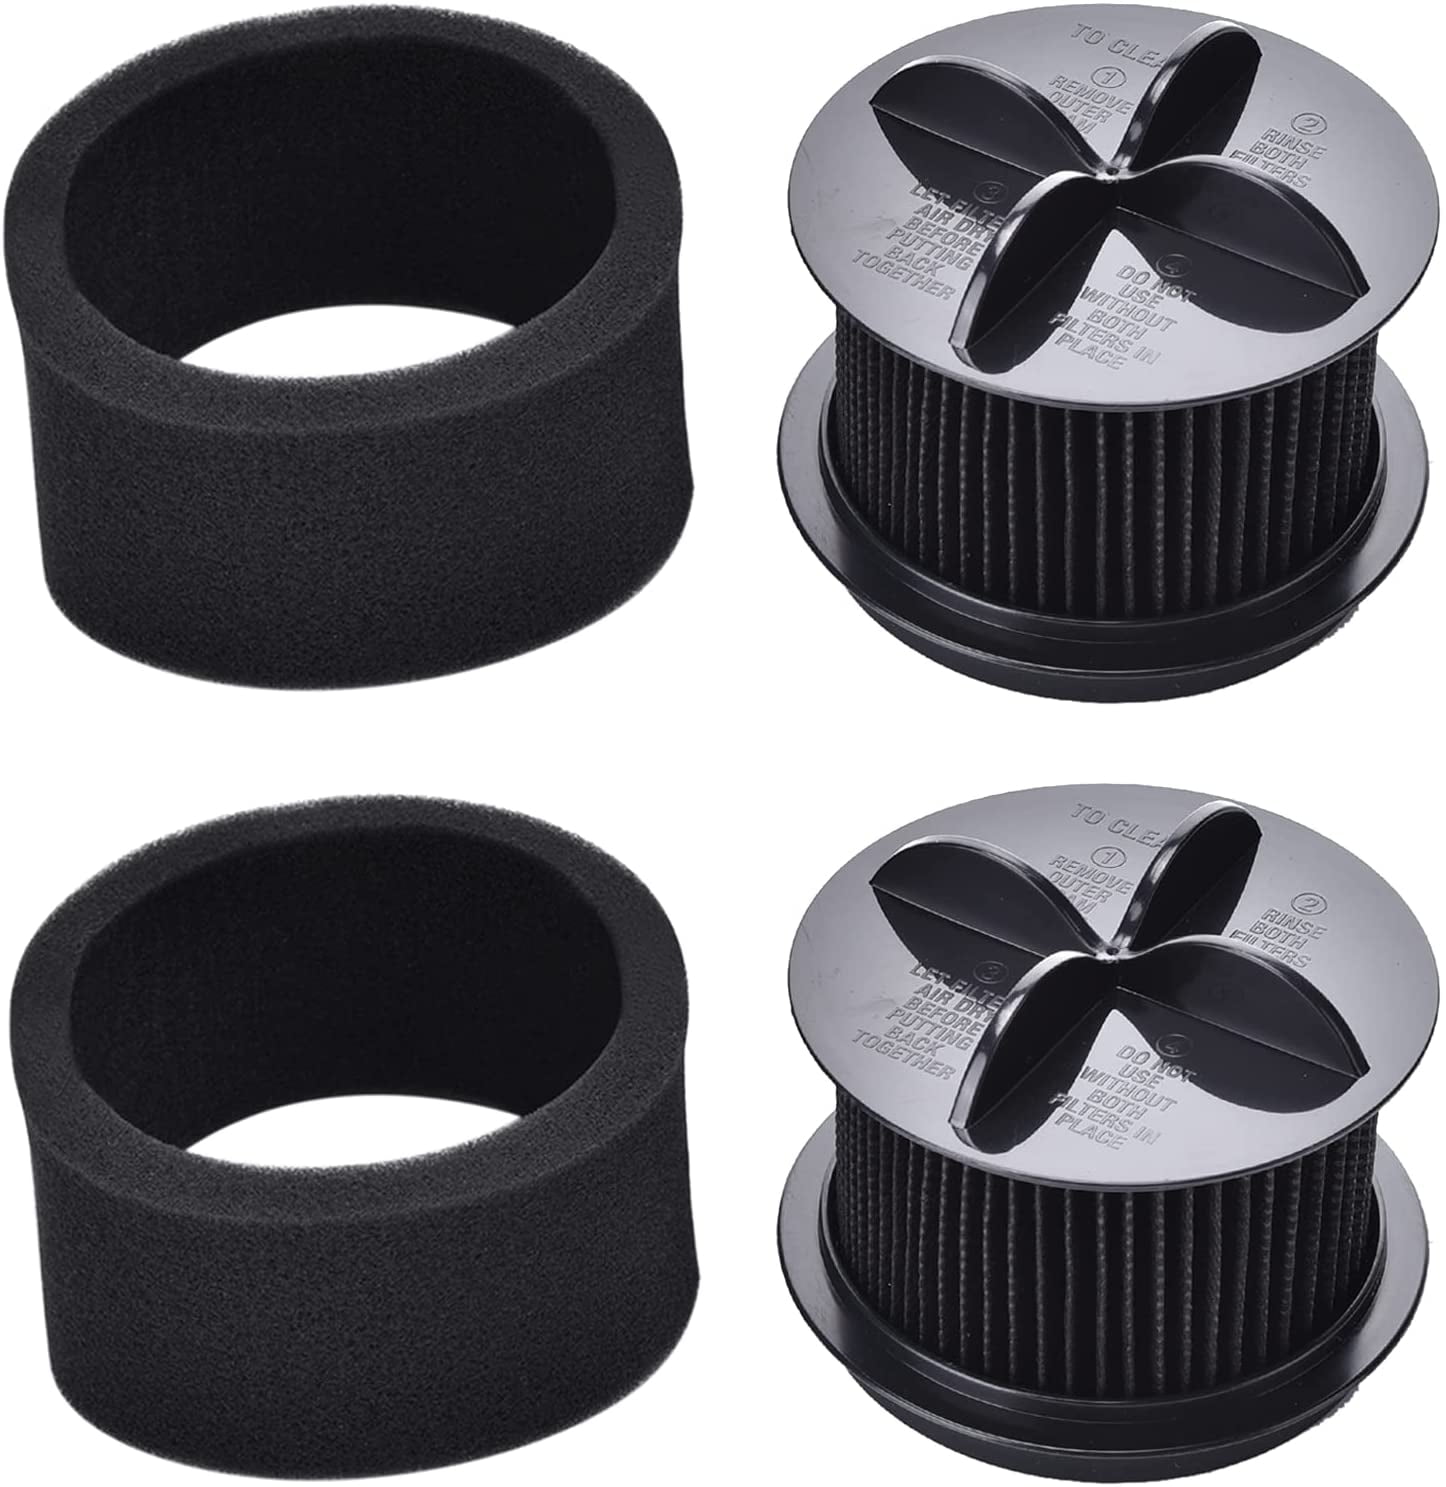 3 Pack Washable Filter Set for Bissell 32R9 Circular Vacuum Replacements Part 